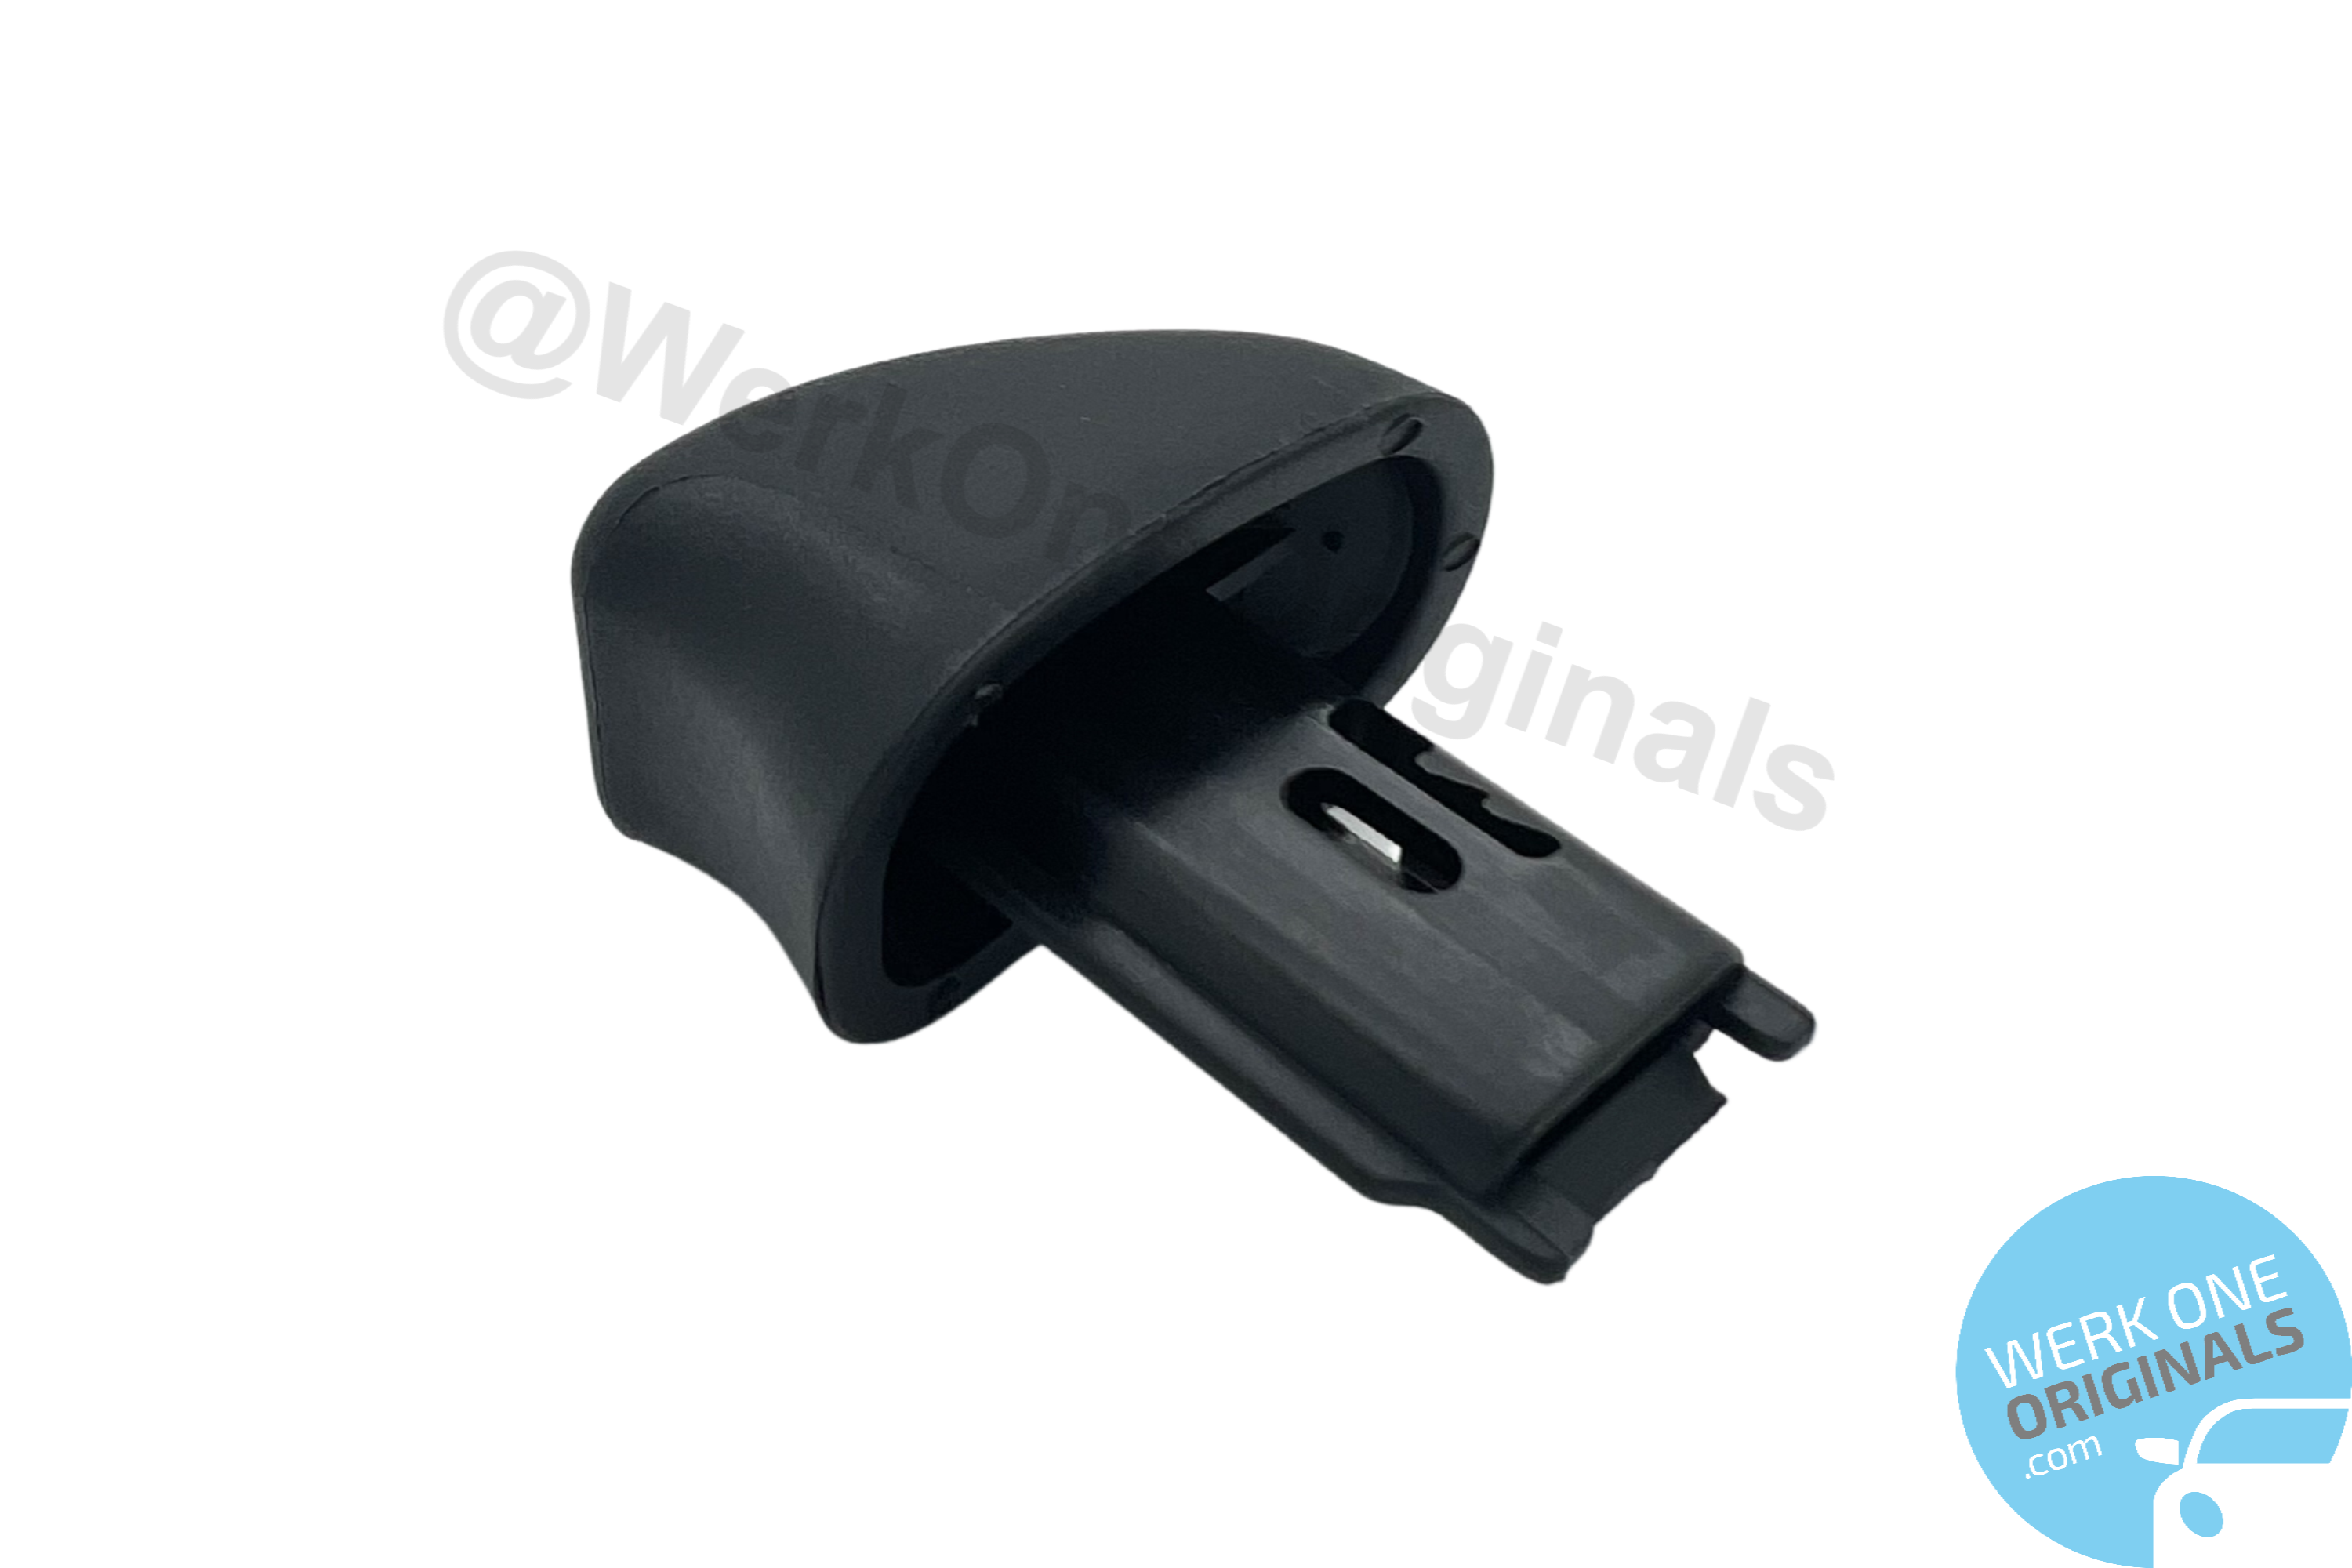 Porsche LH Seat Release Handle for 911 Type 996 Models